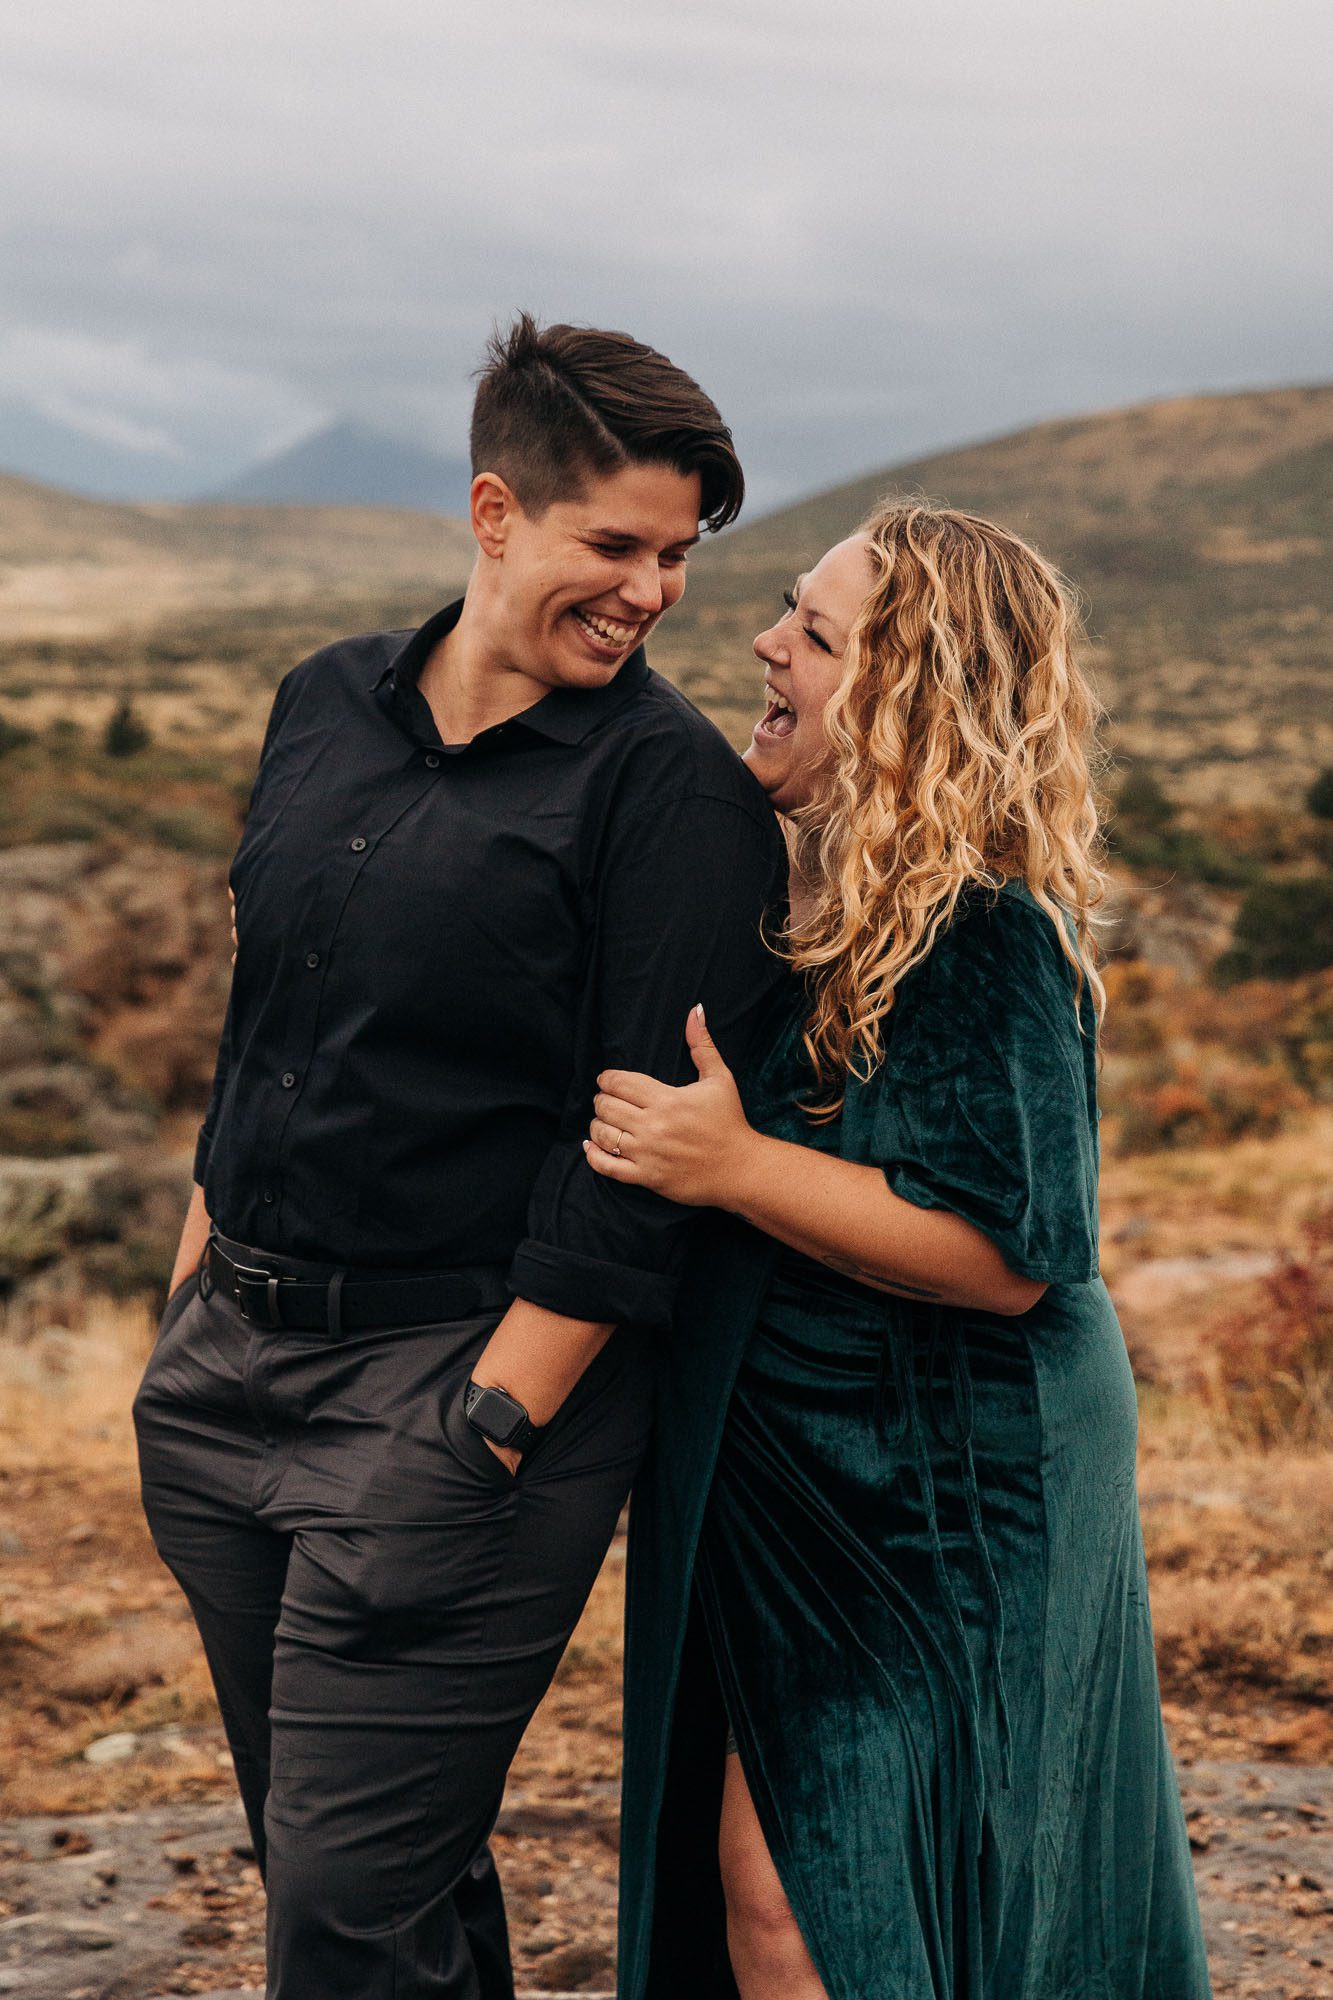 LGBTQ couple embraces in front of a distant mountain for their Colorado engagement photos